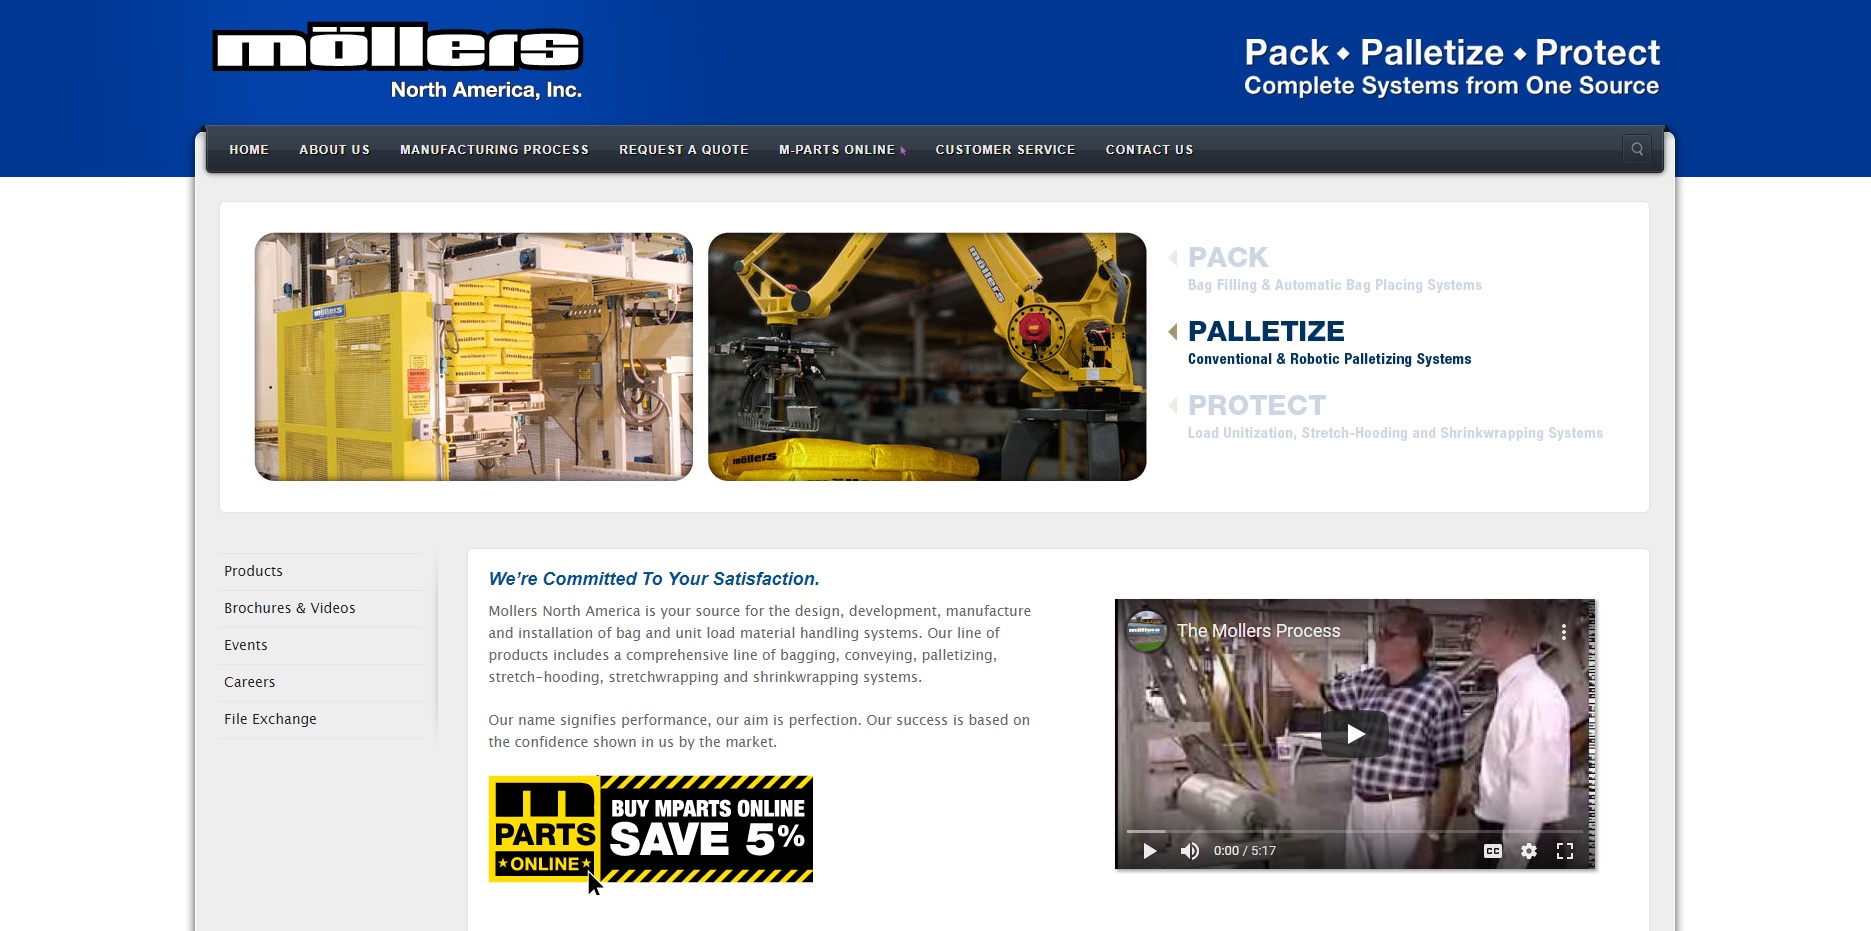 Mollers North America  Pack, Palletize and Protect.